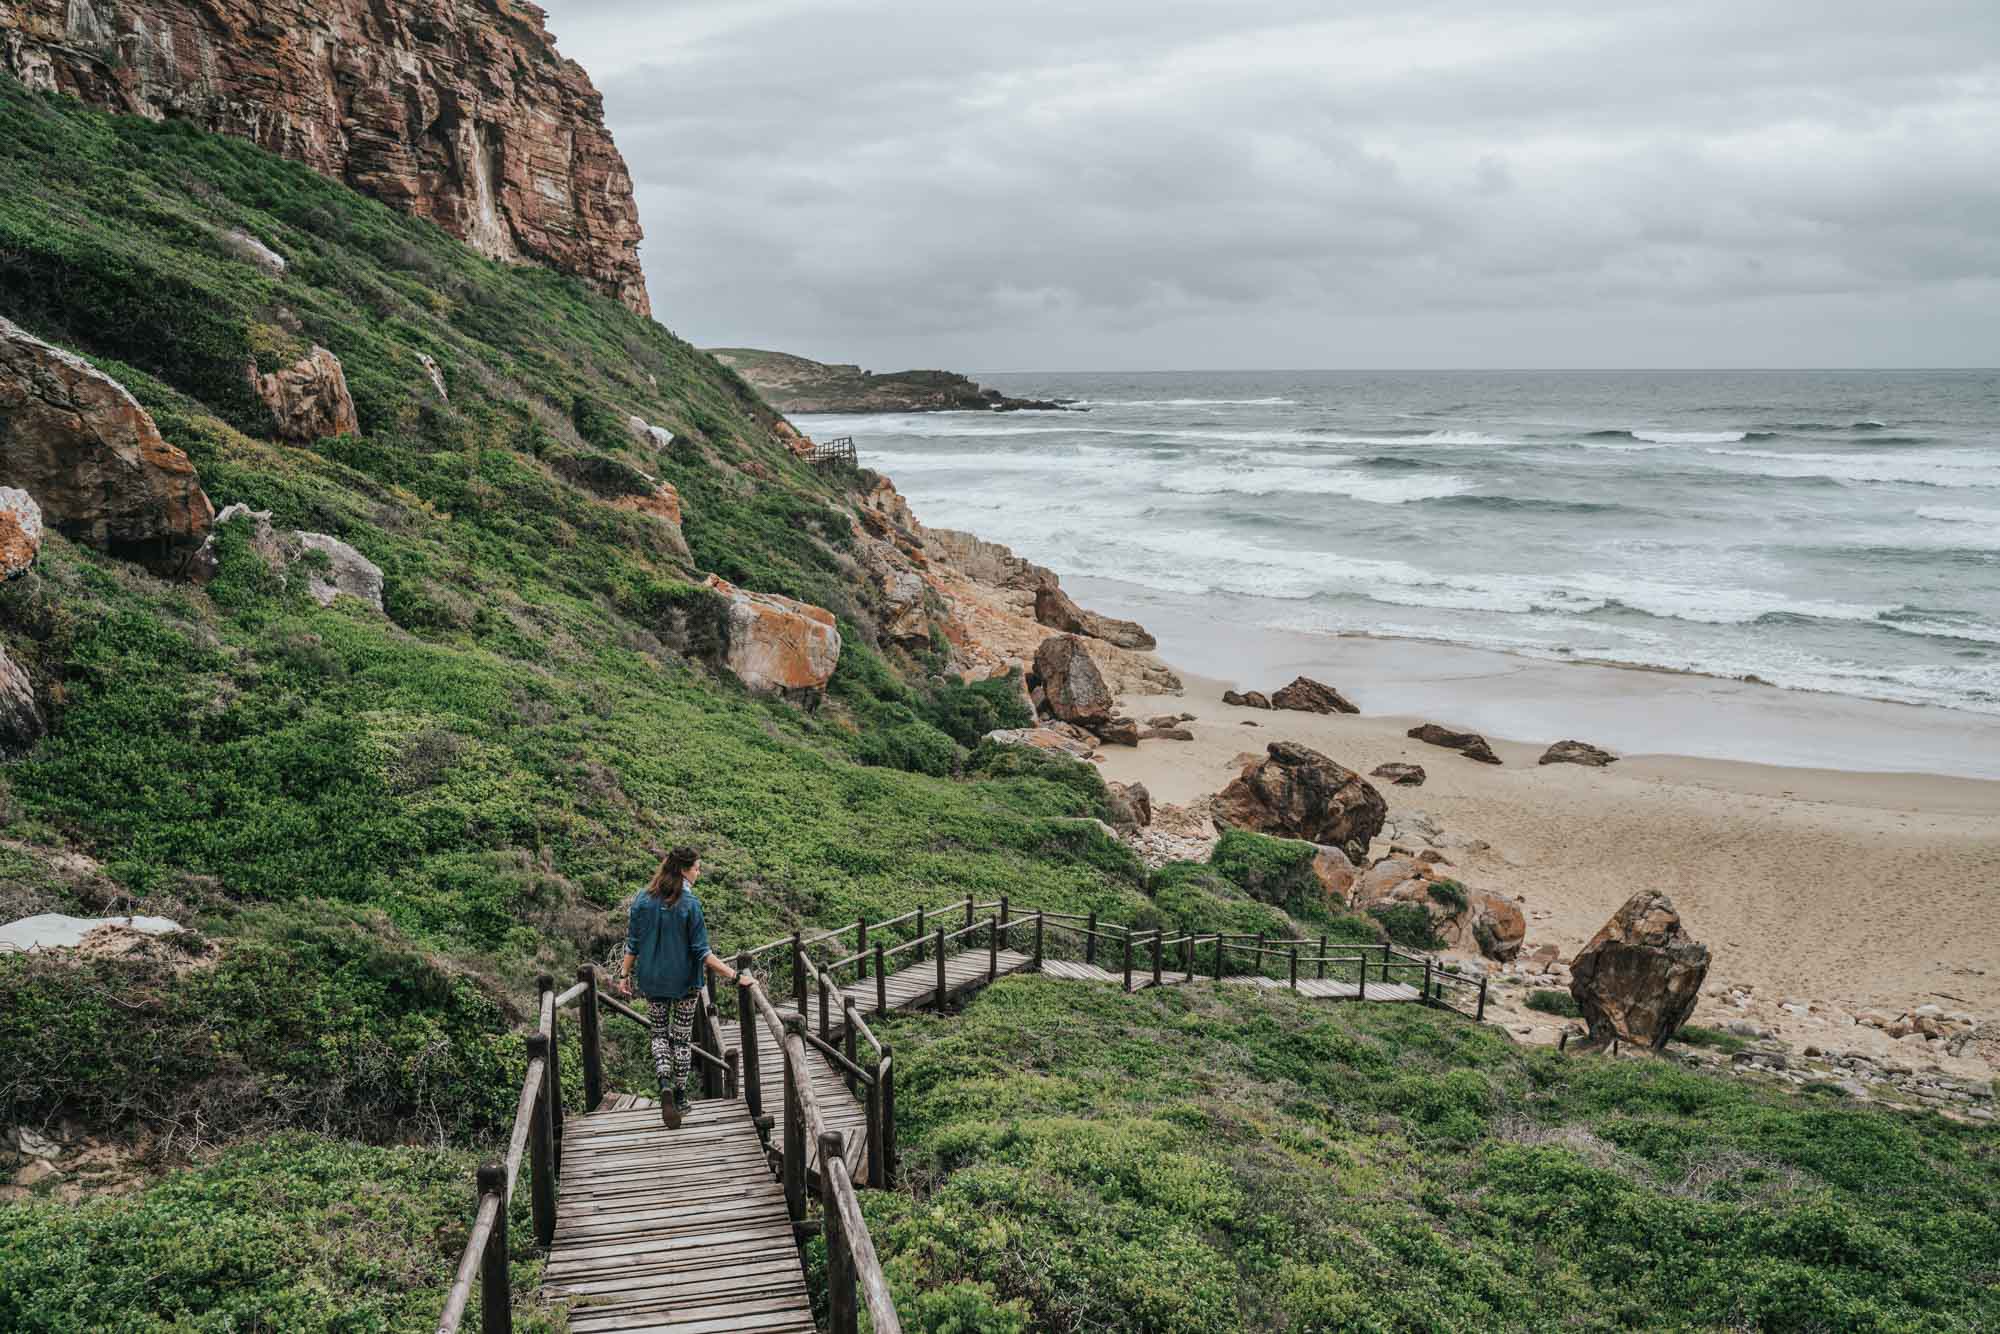 The Ultimate Garden Route Itinerary: Recommended Activities, Hotels, Restaurants & More